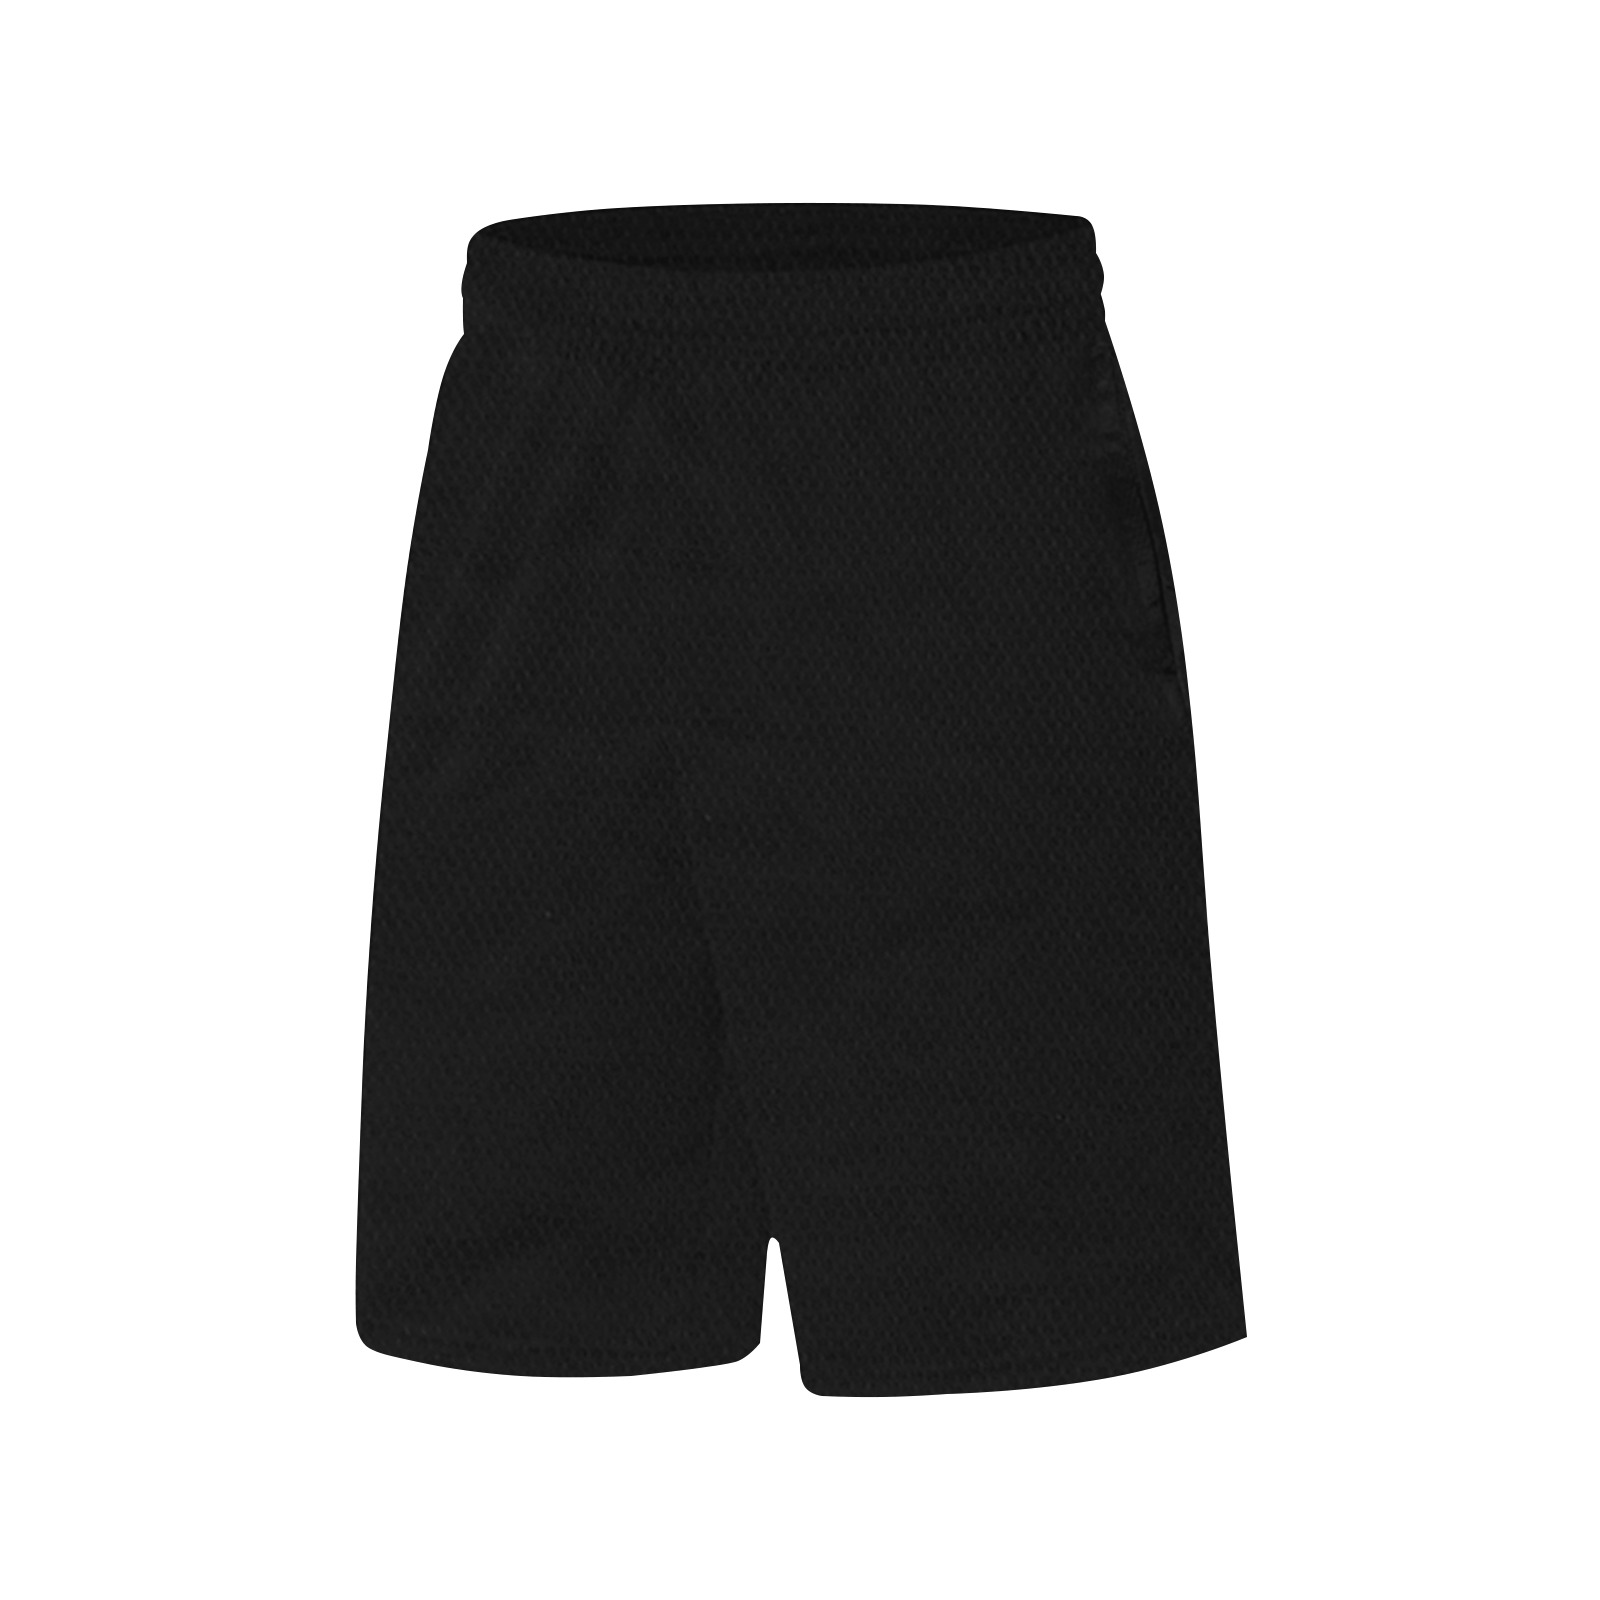 black All Over Print Basketball Shorts with Pocket